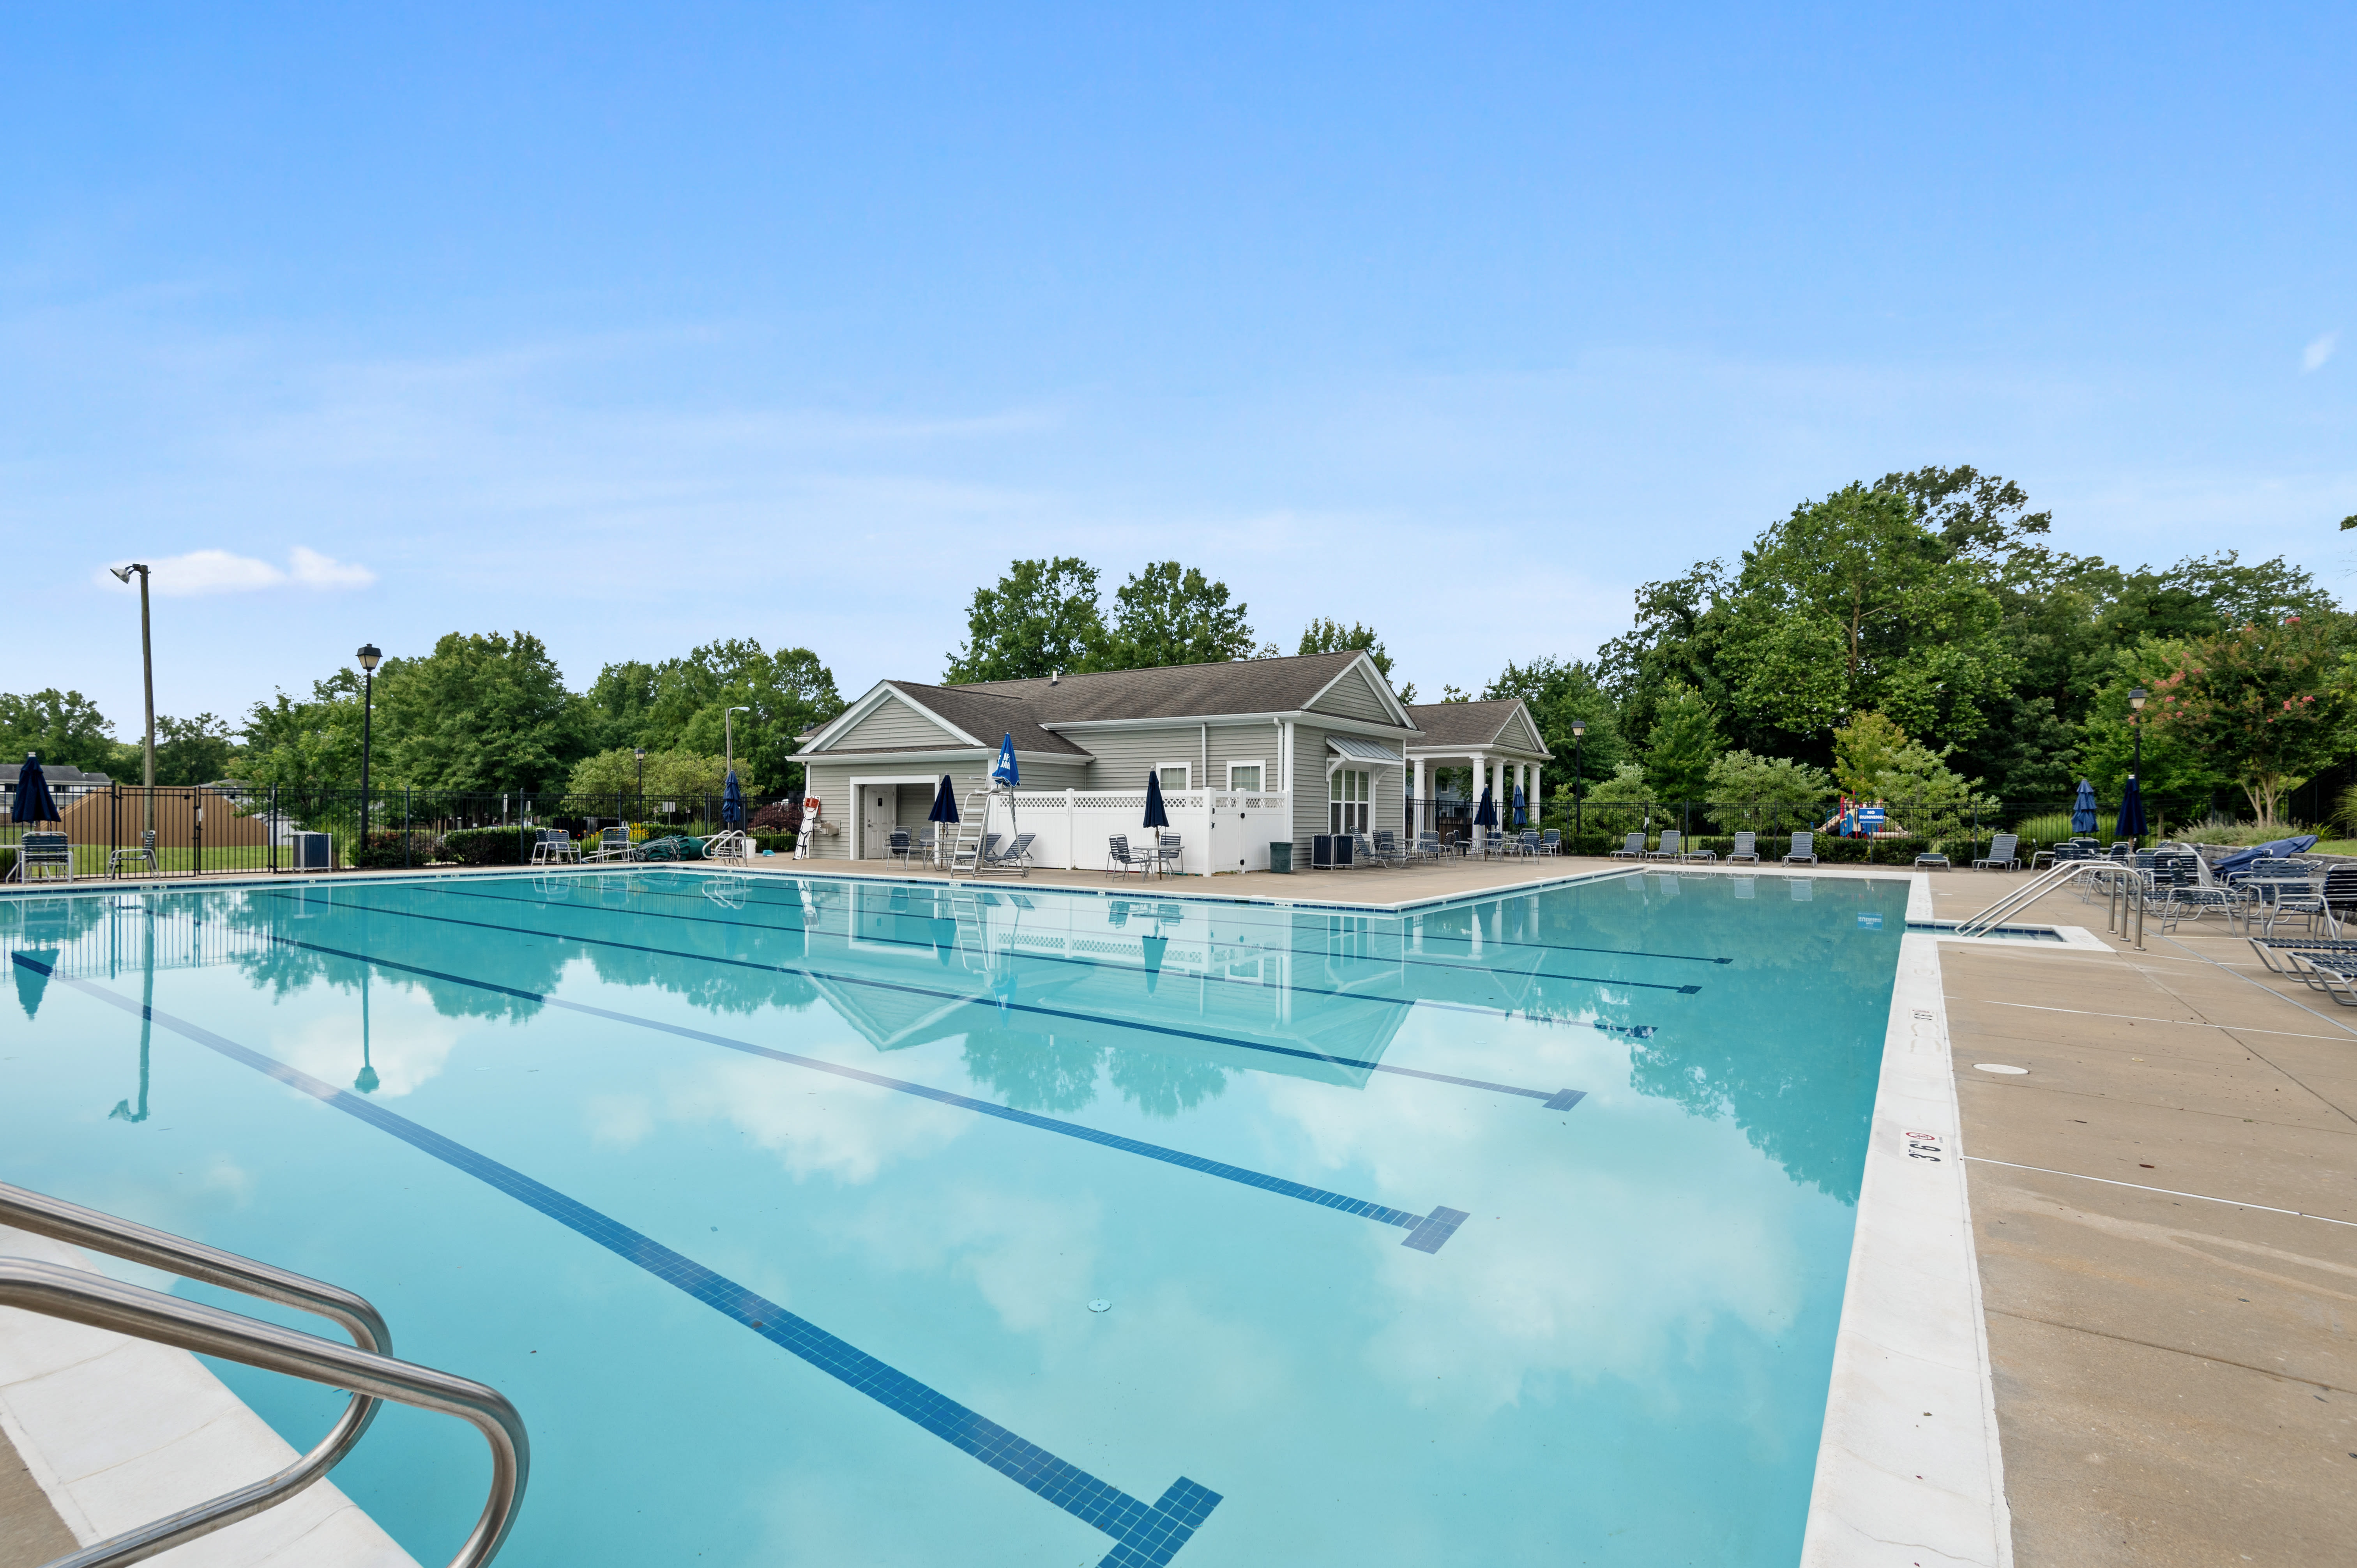 Swimming pool at Glenn Forest in Lexington Park, Maryland